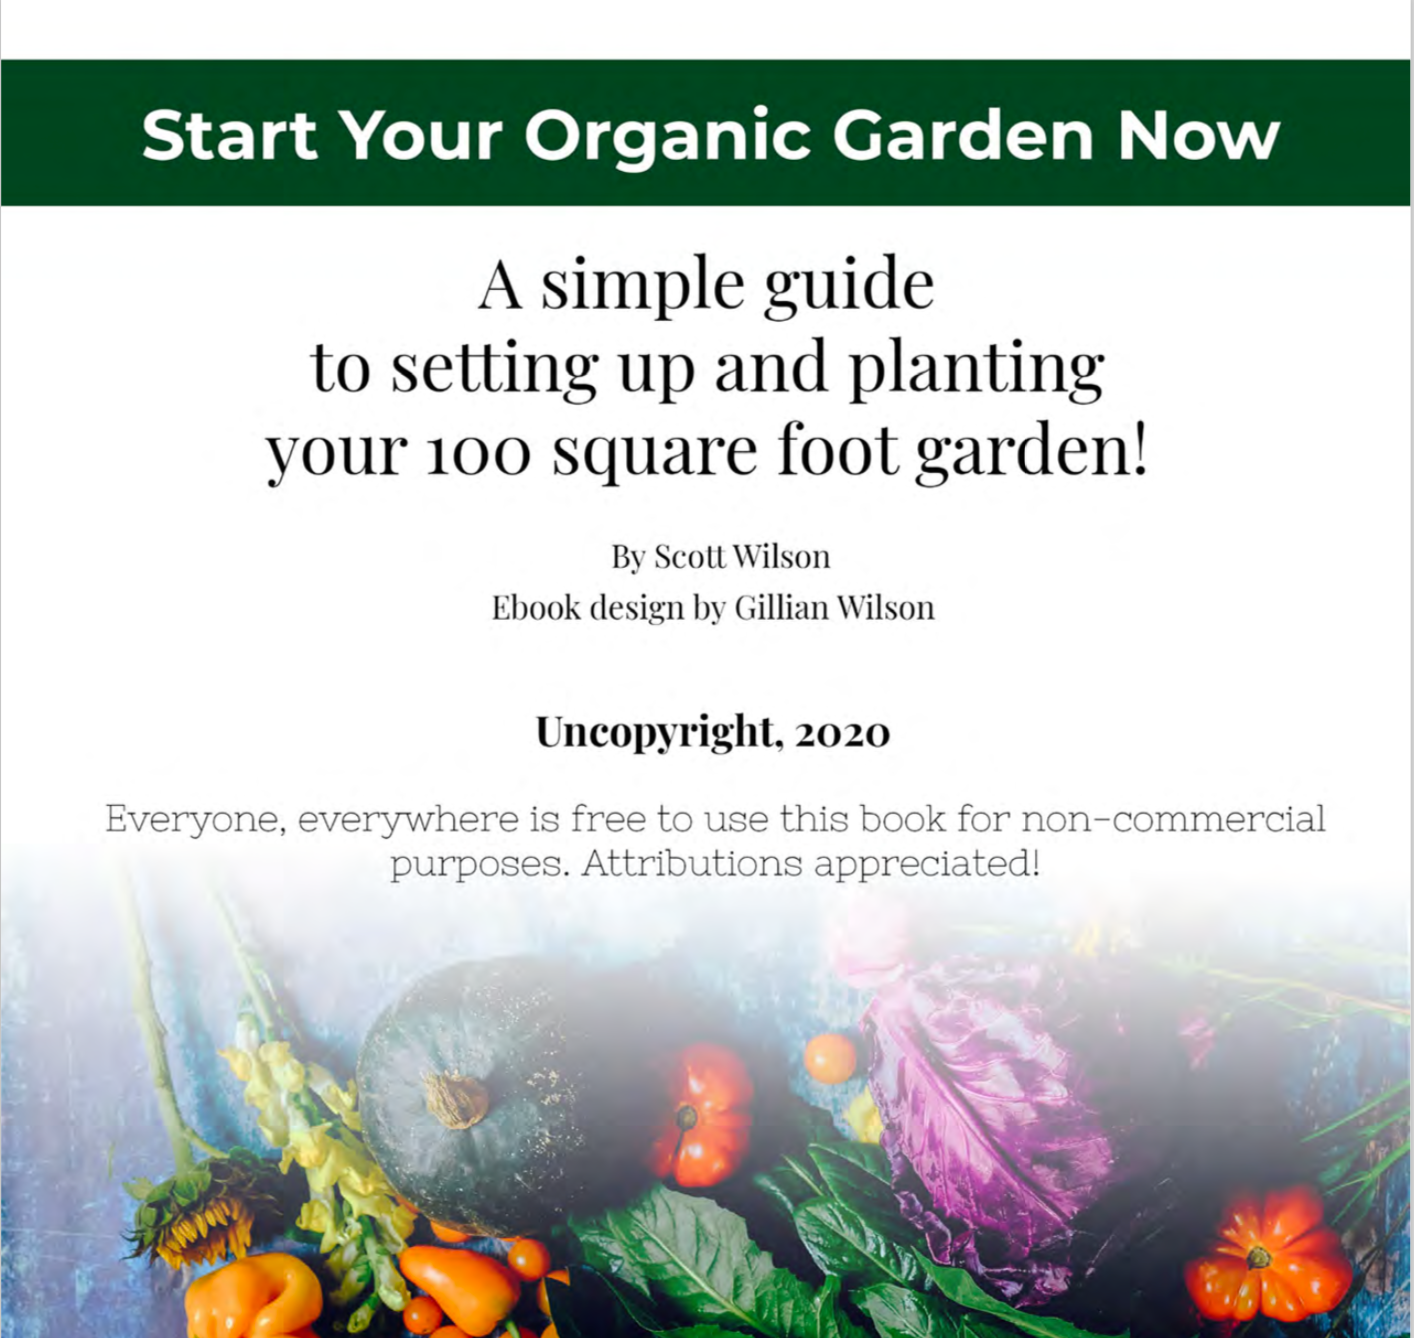 The 100 Square Foot Garden